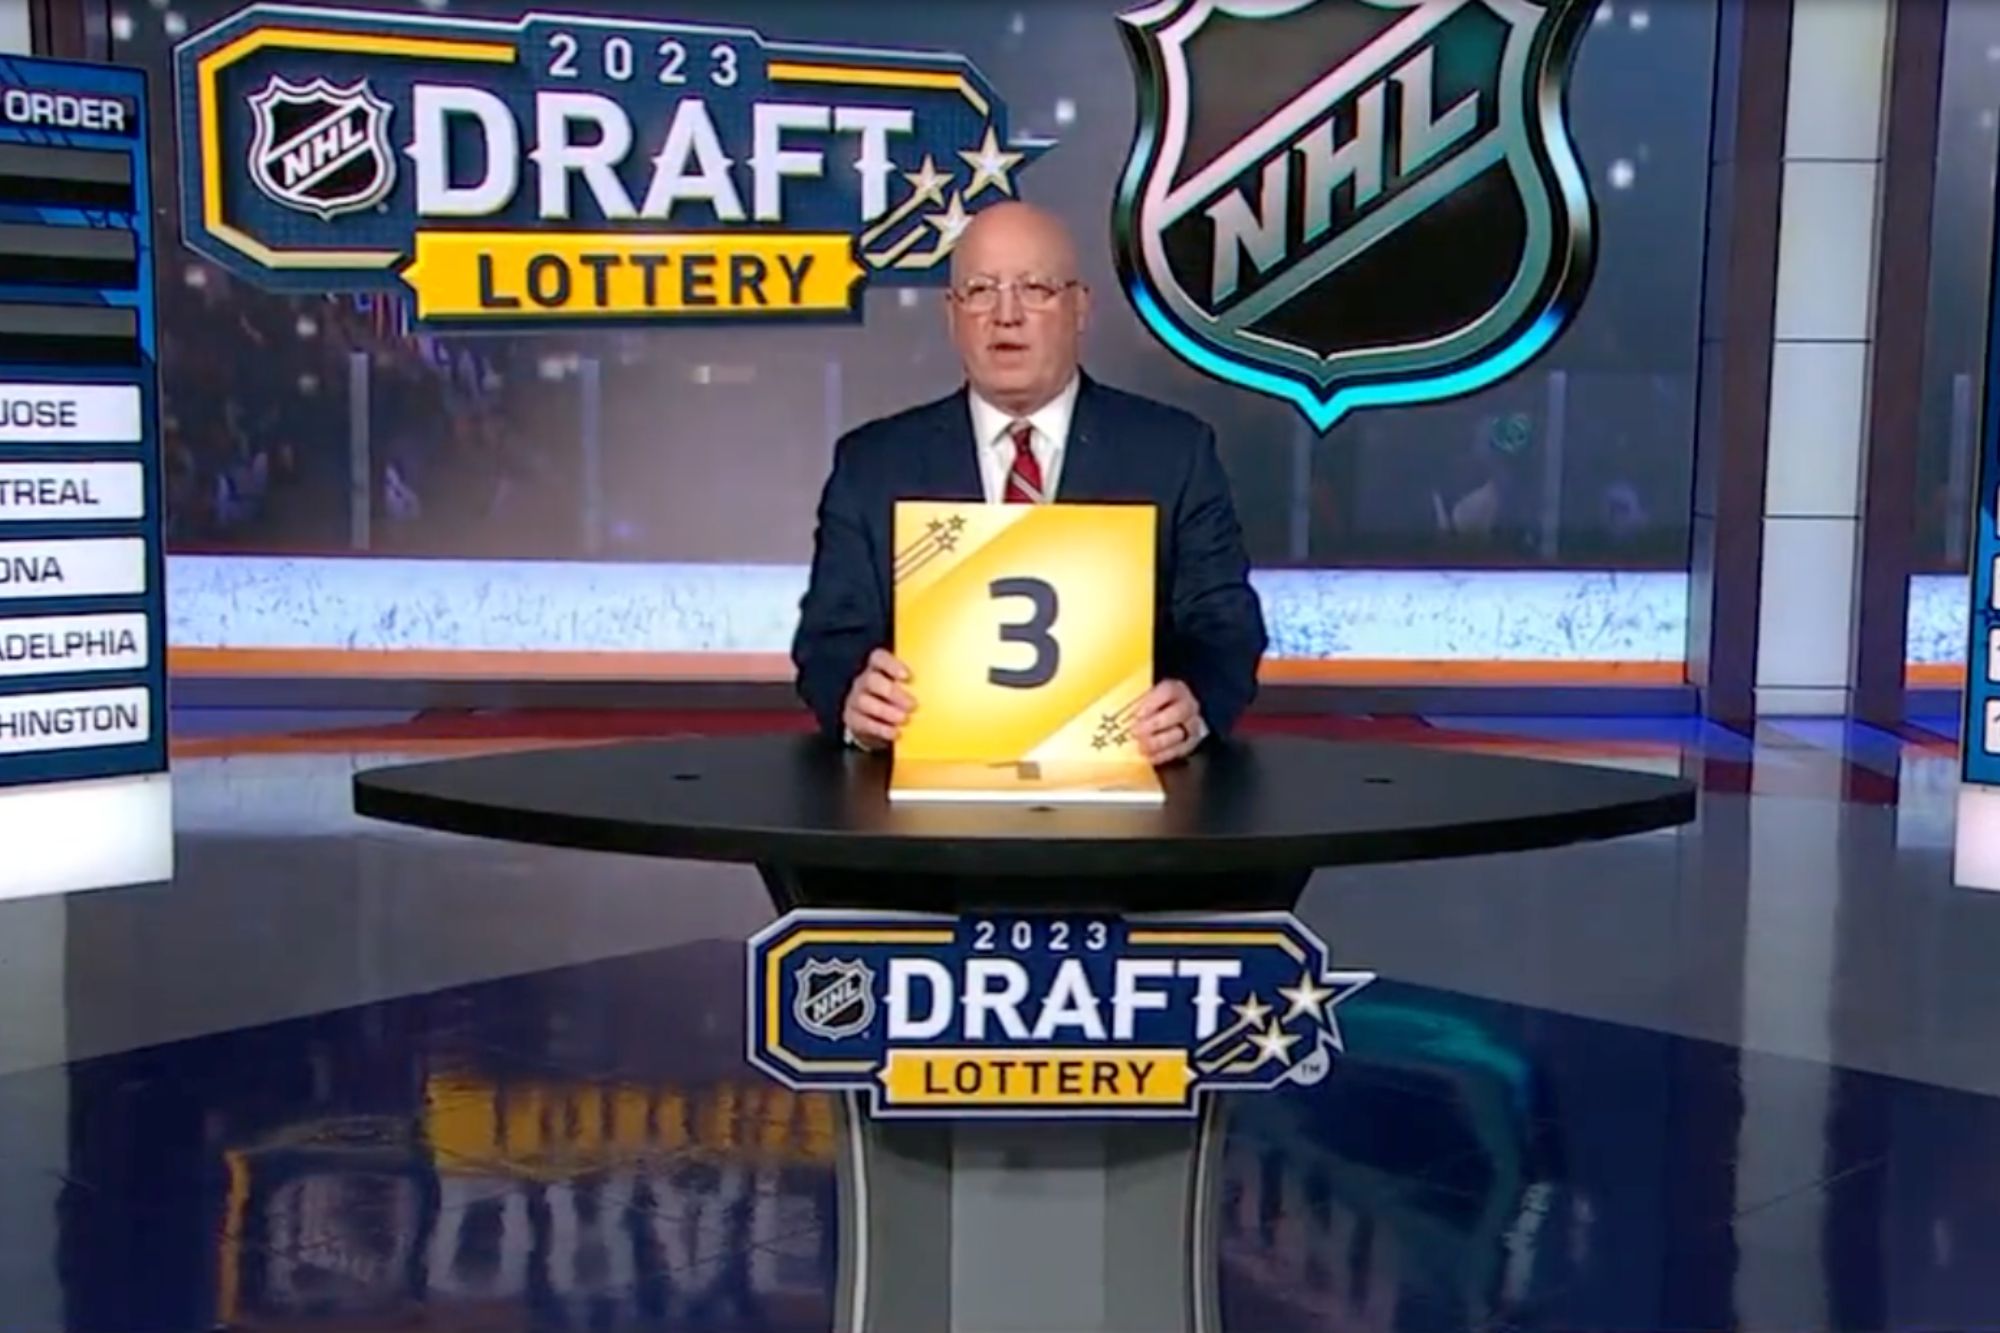 ESPN reveals No. 3 pick early in 2023 NHL Draft lottery gaffe